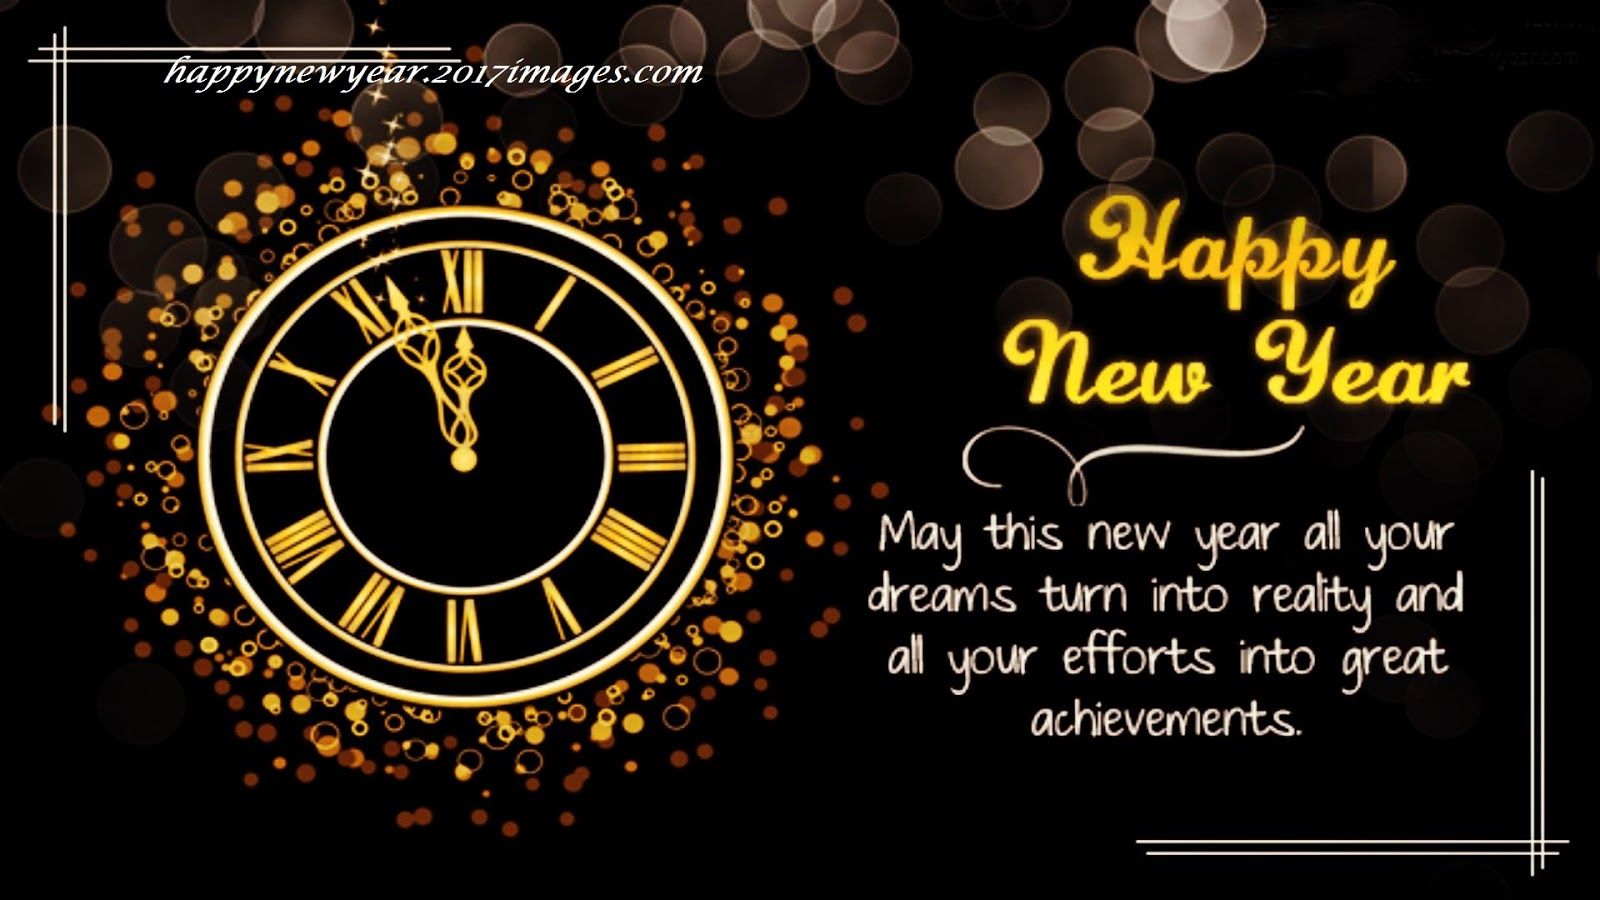 Best Happy New Year 2017 Image, Wishes Quotes ideas. happy new year image, happy new year wallpaper, new year image